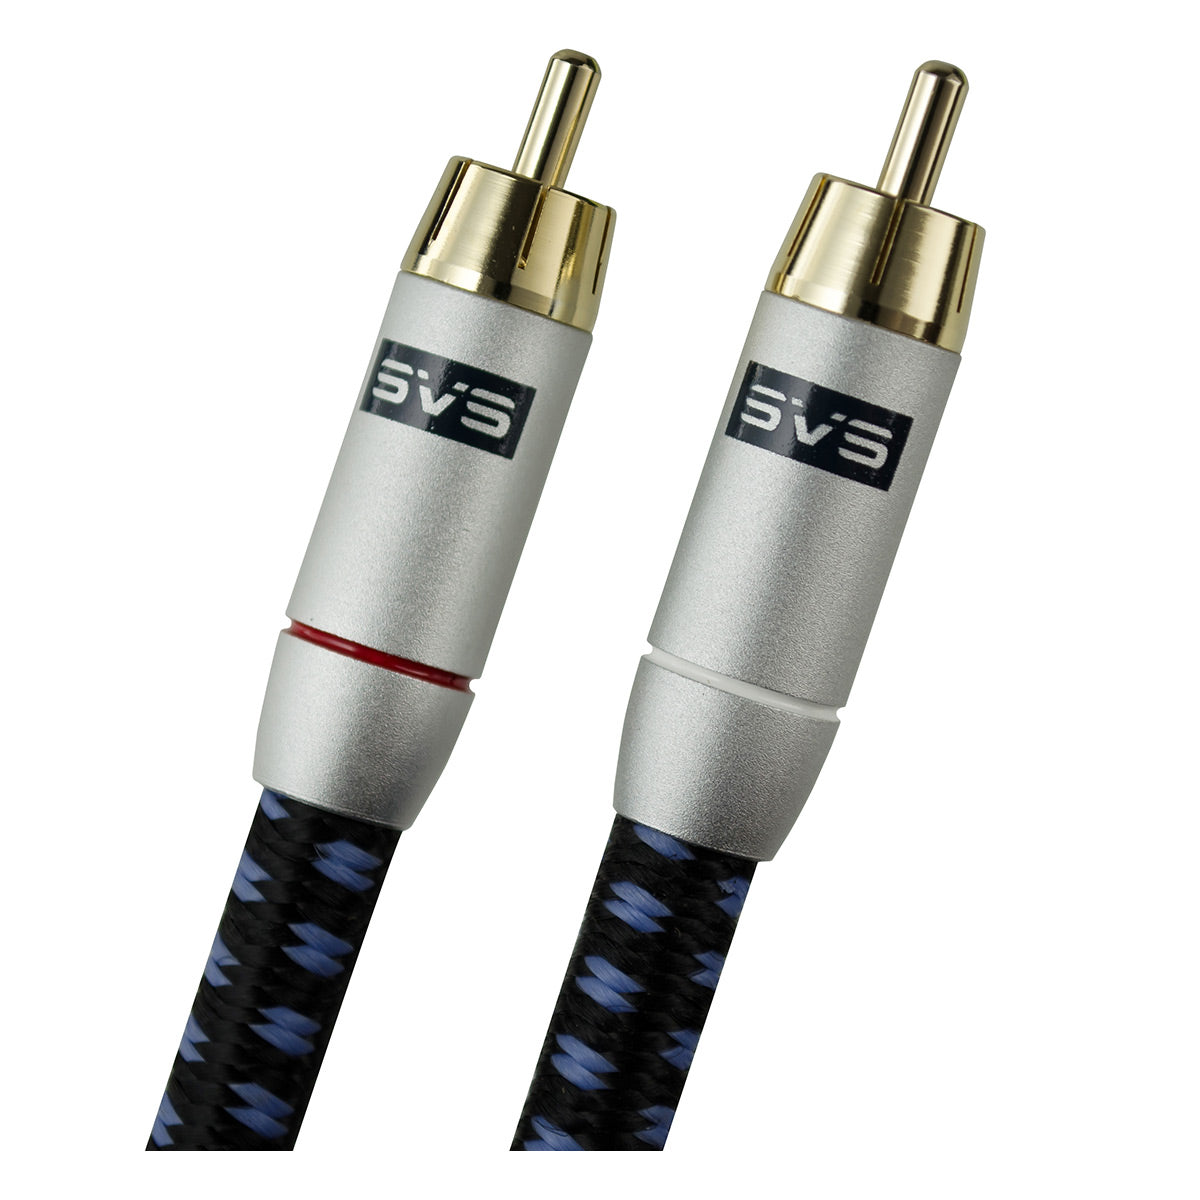 SVS SoundPath RCA Audio Interconnect Cable for Subwoofers - 3.28 ft. (1m)